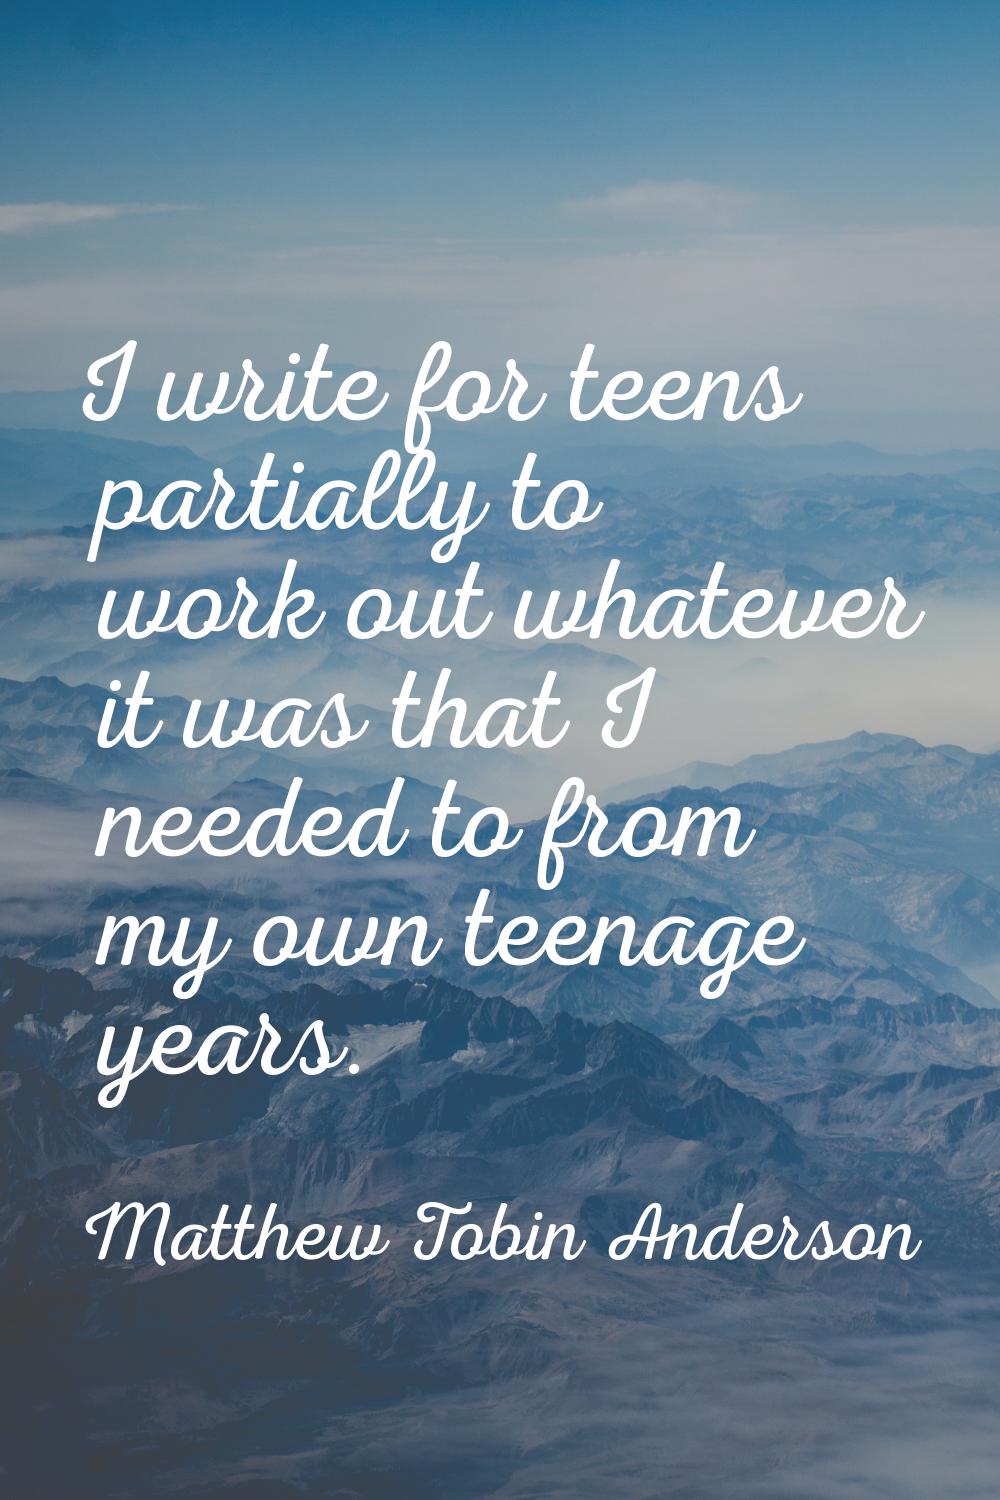 I write for teens partially to work out whatever it was that I needed to from my own teenage years.